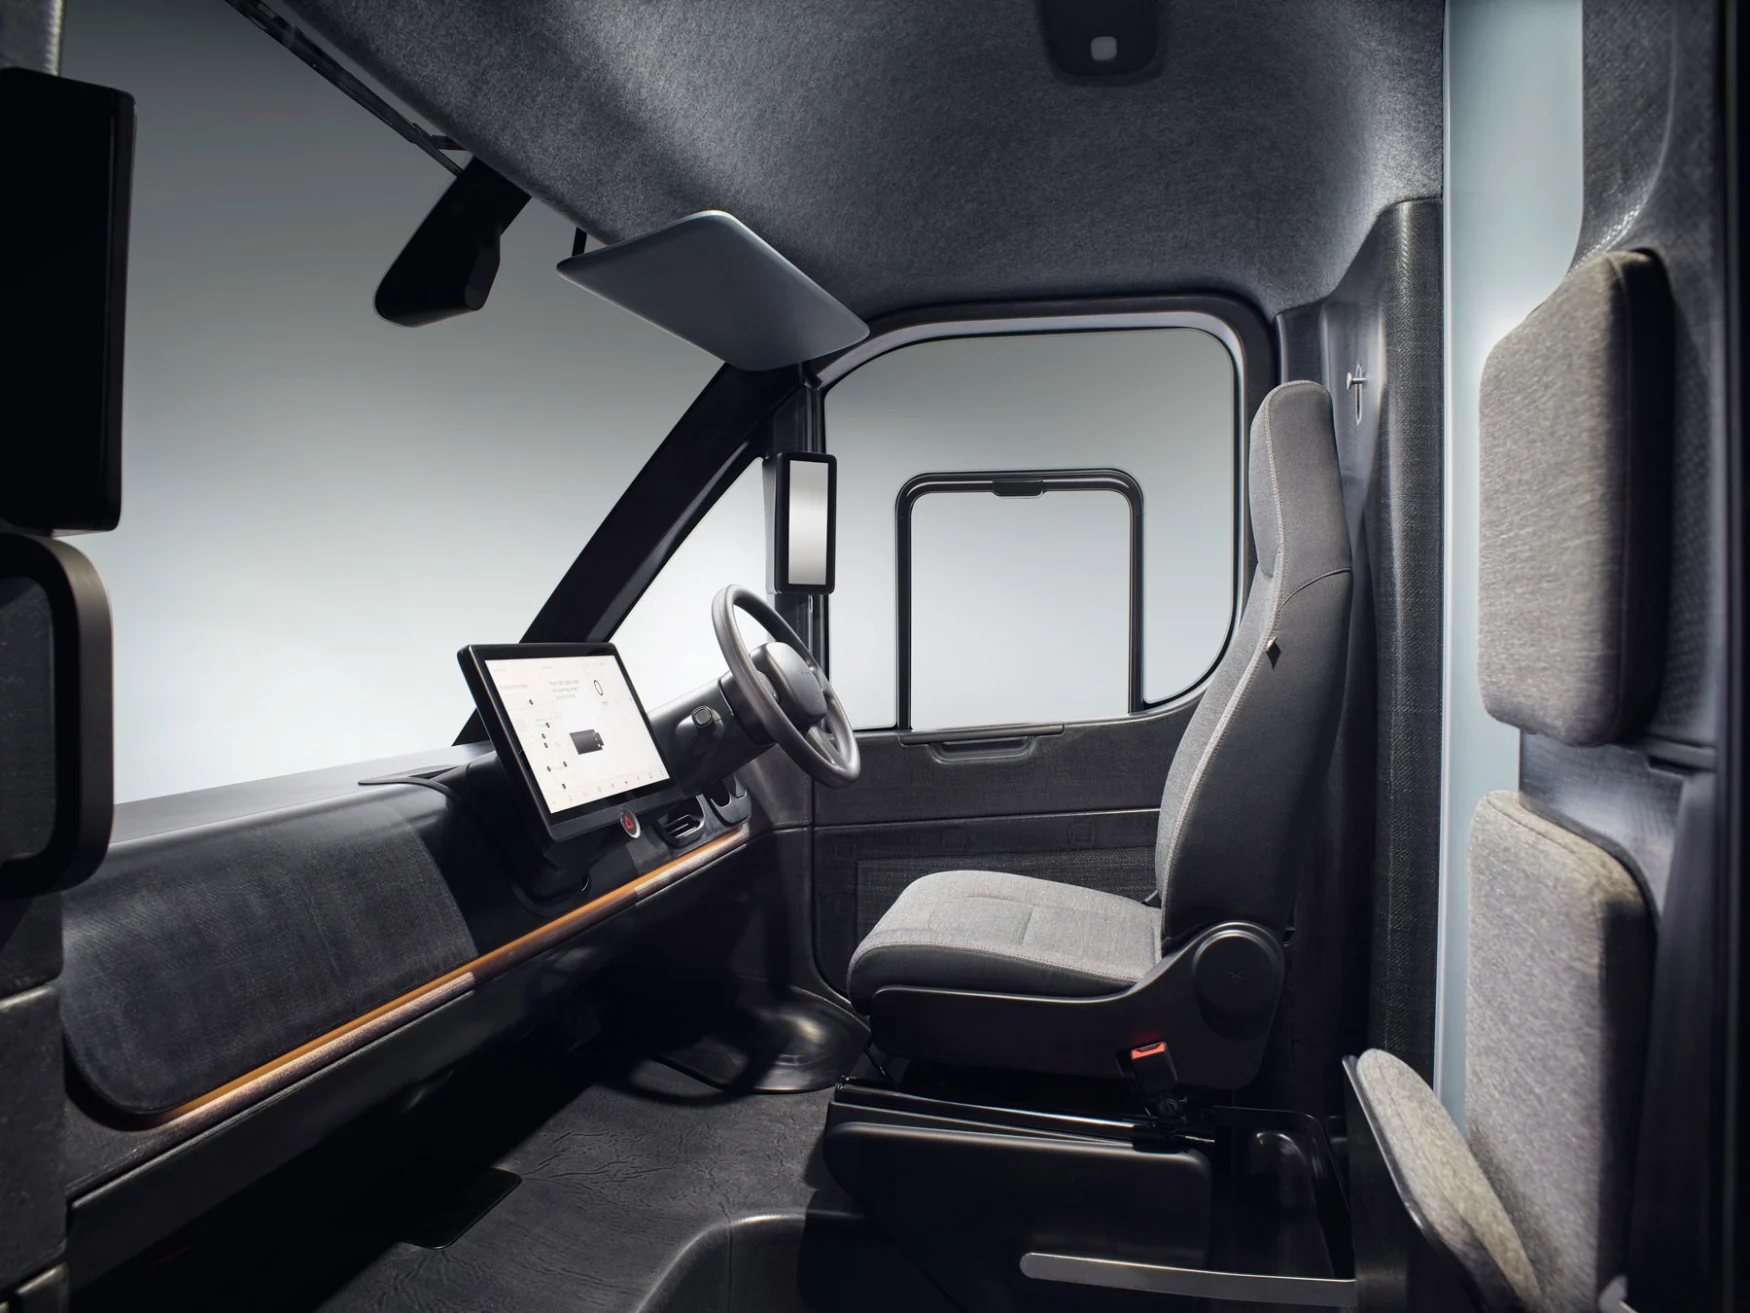 Image of the interior of the Arrival Van